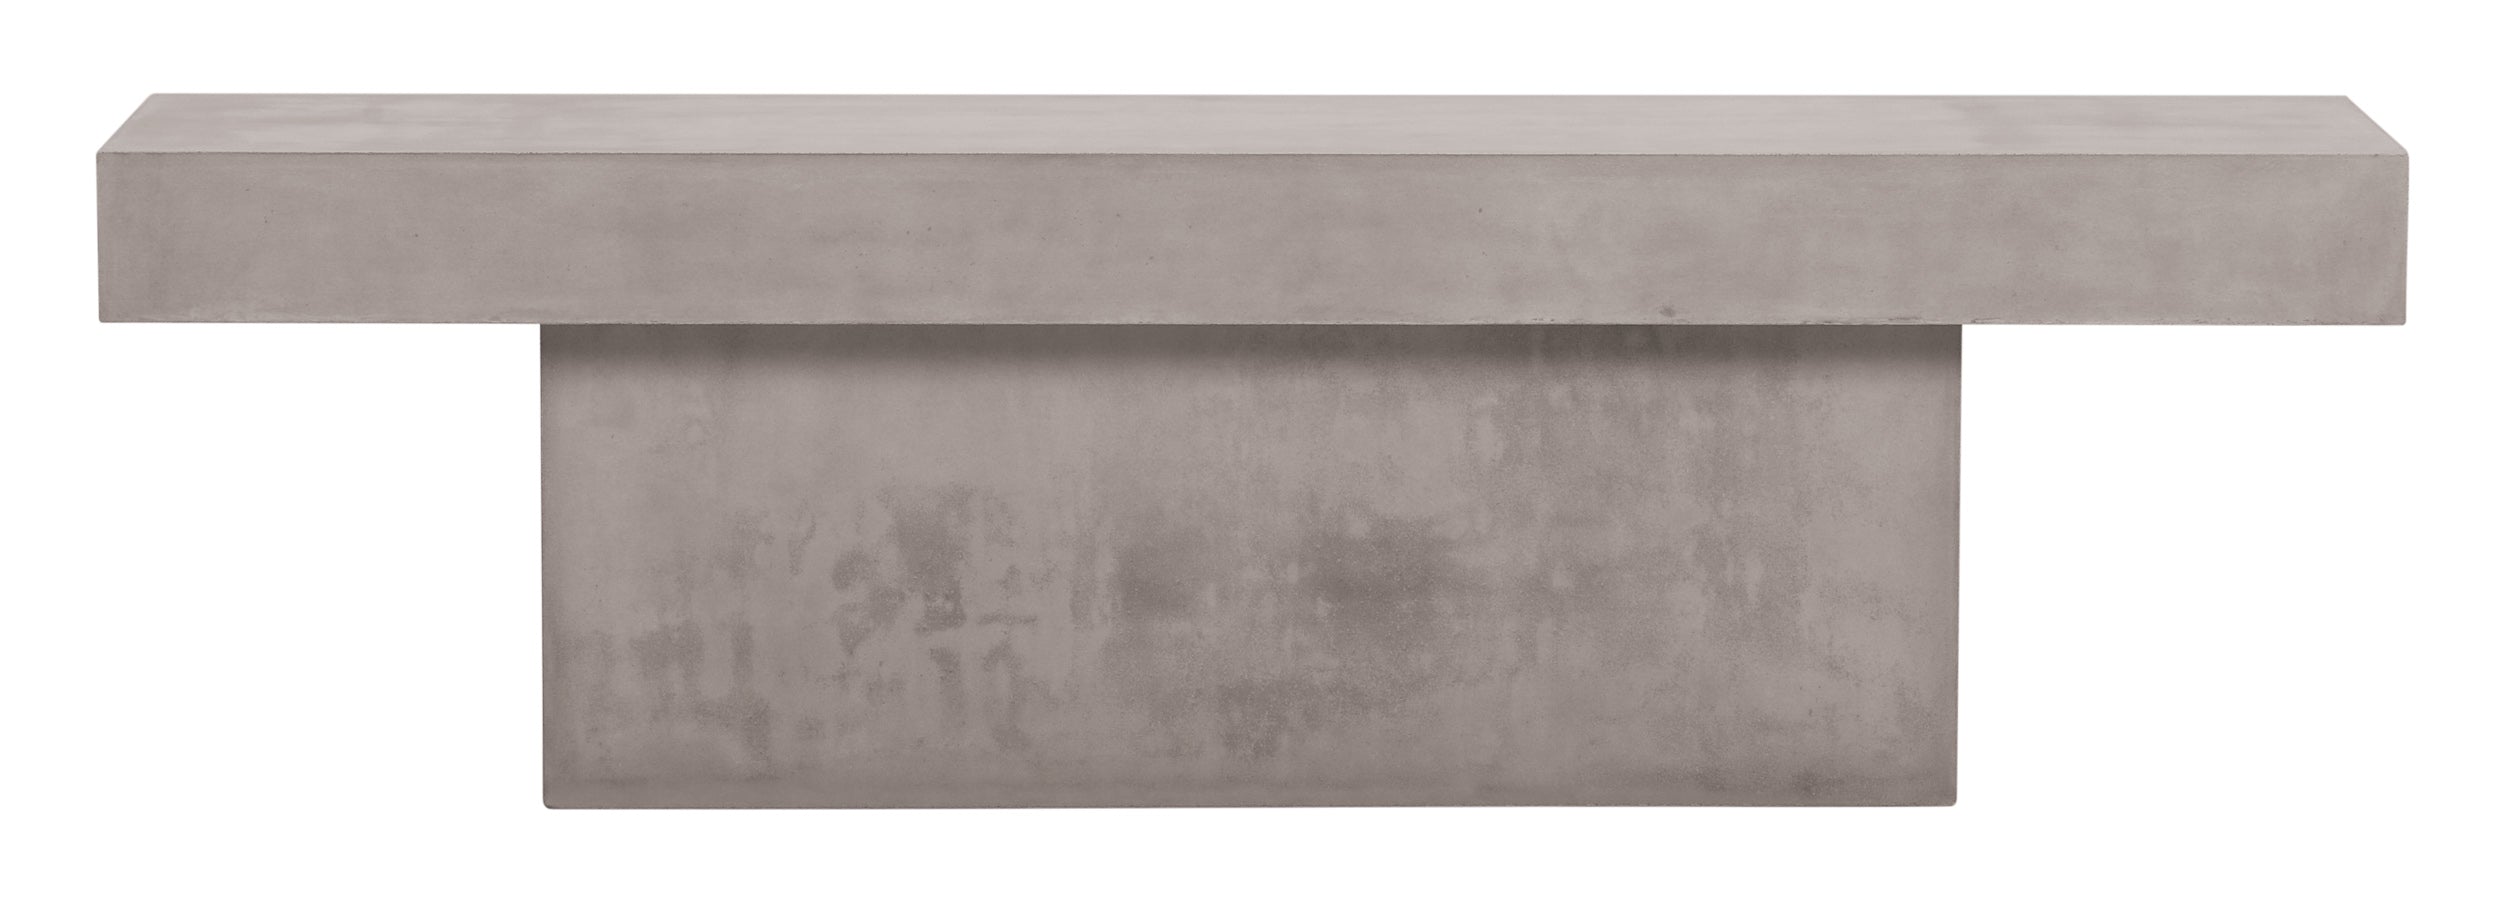 Perpetual T-Bench – Slate Gray Outdoor Bench